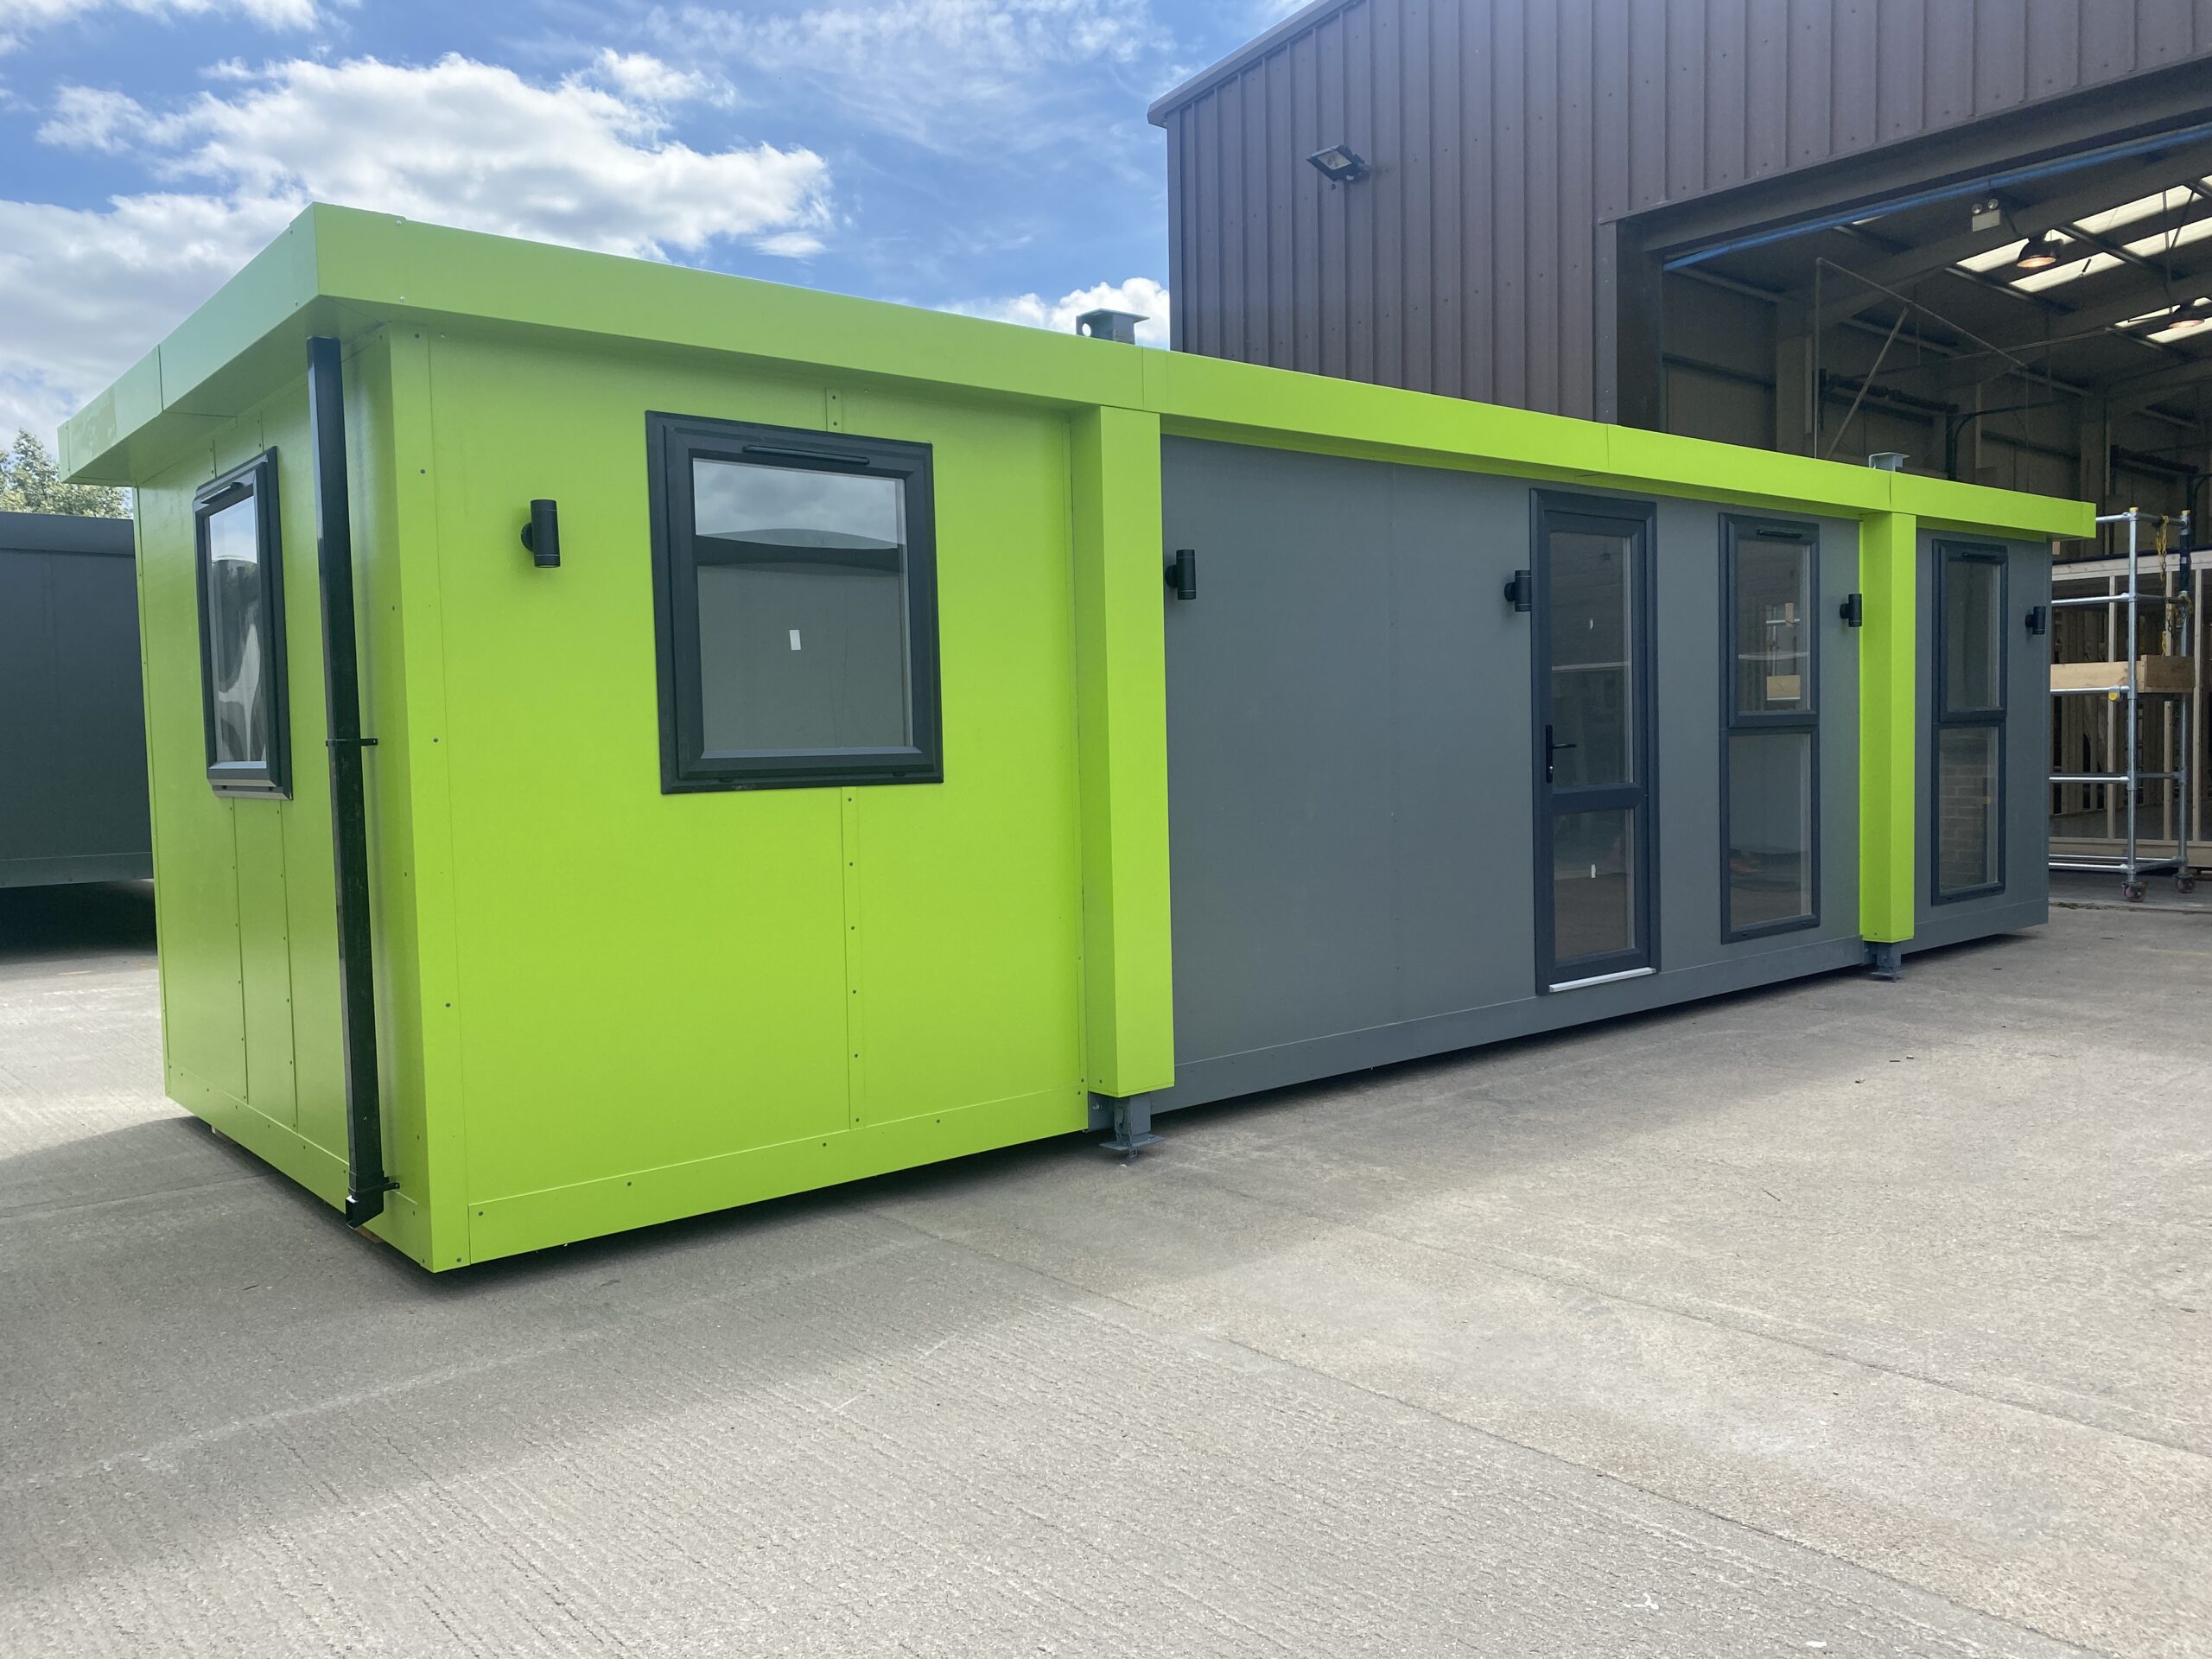 Portable Buildings: A Cost-Effective Solution for the UK Healthcare Sector